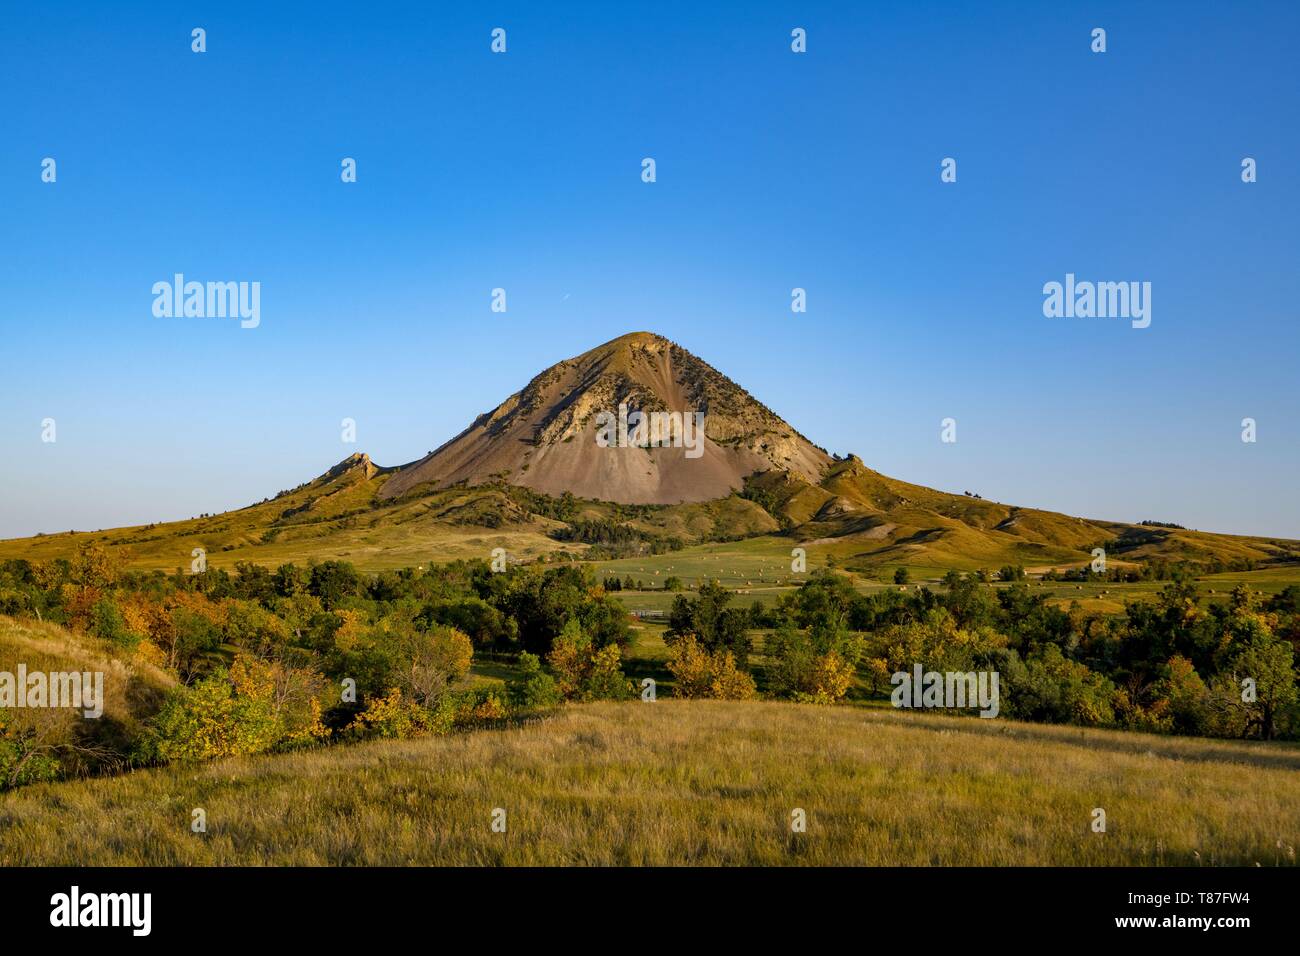 United States, South Dakota, Sturgis, the Bear mountain is an important landmark and religious site for the Plains Indians tribes Stock Photo